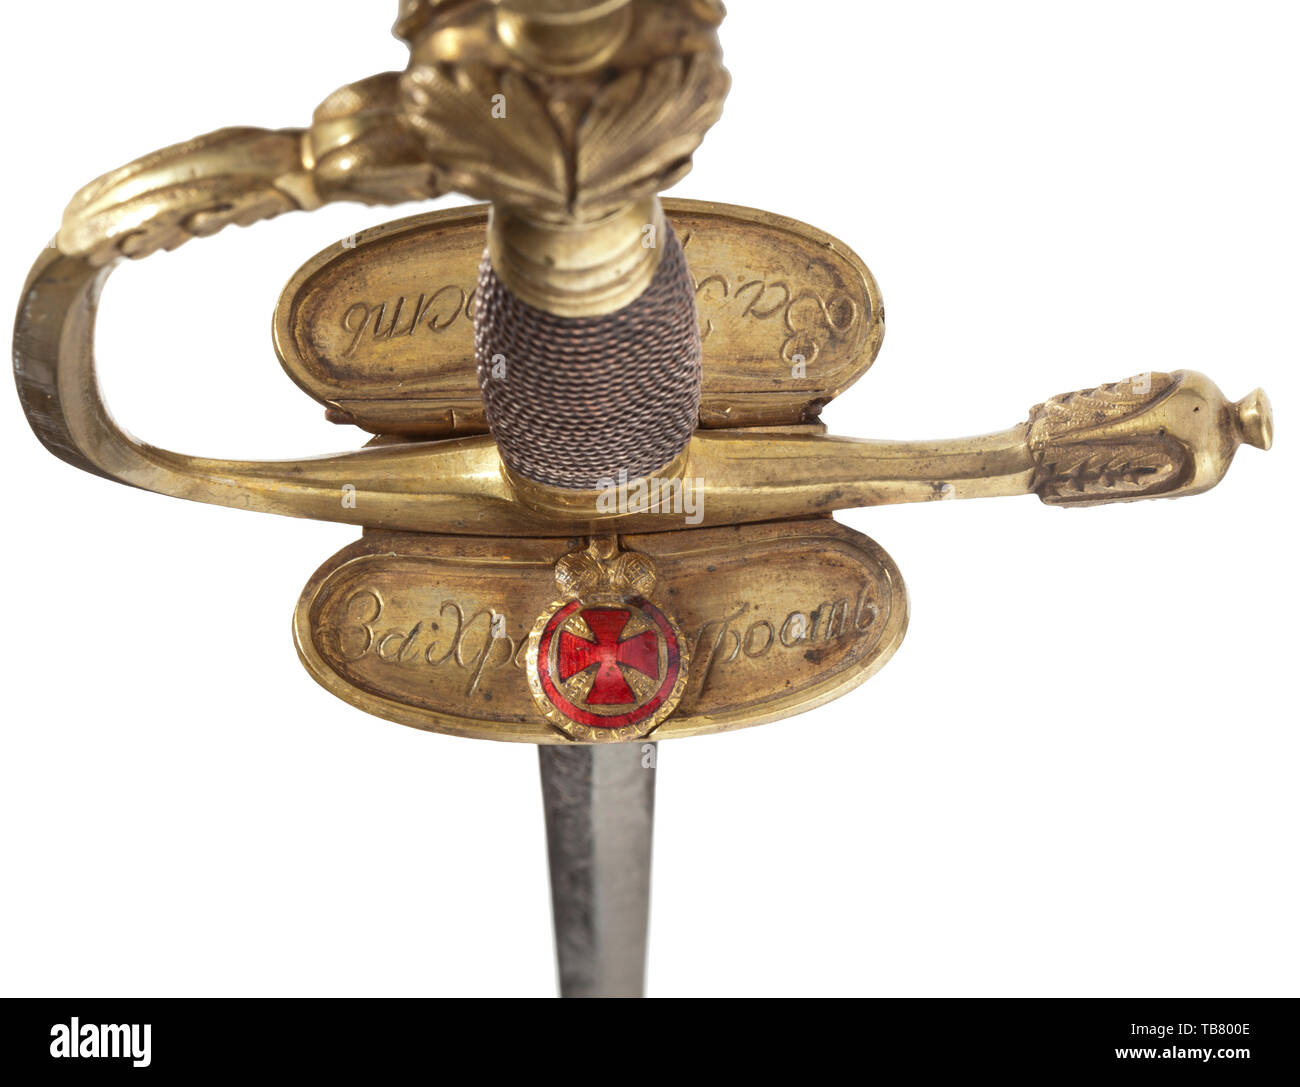 A small-sword M 1798 for bravery with applied Order of St. Anne for Russian infantry officers, Slender, double-edged thrusting blade. Etched trophies with floral decoration on both sides. On ricasso maker's mark 'E.& F. Hörster Solingen'. Hilt with floral décor and brass wire winding, remnants of gold-plating. On insides of guard plates engraved Cyrillic inscriptions 'For Bravery' as well as applied miniature of the Order of St. Anne. Leather-covered wooden scabbard with brass mountings. Length 90 cm. historic, historical, Additional-Rights-Clearance-Info-Not-Available Stock Photo